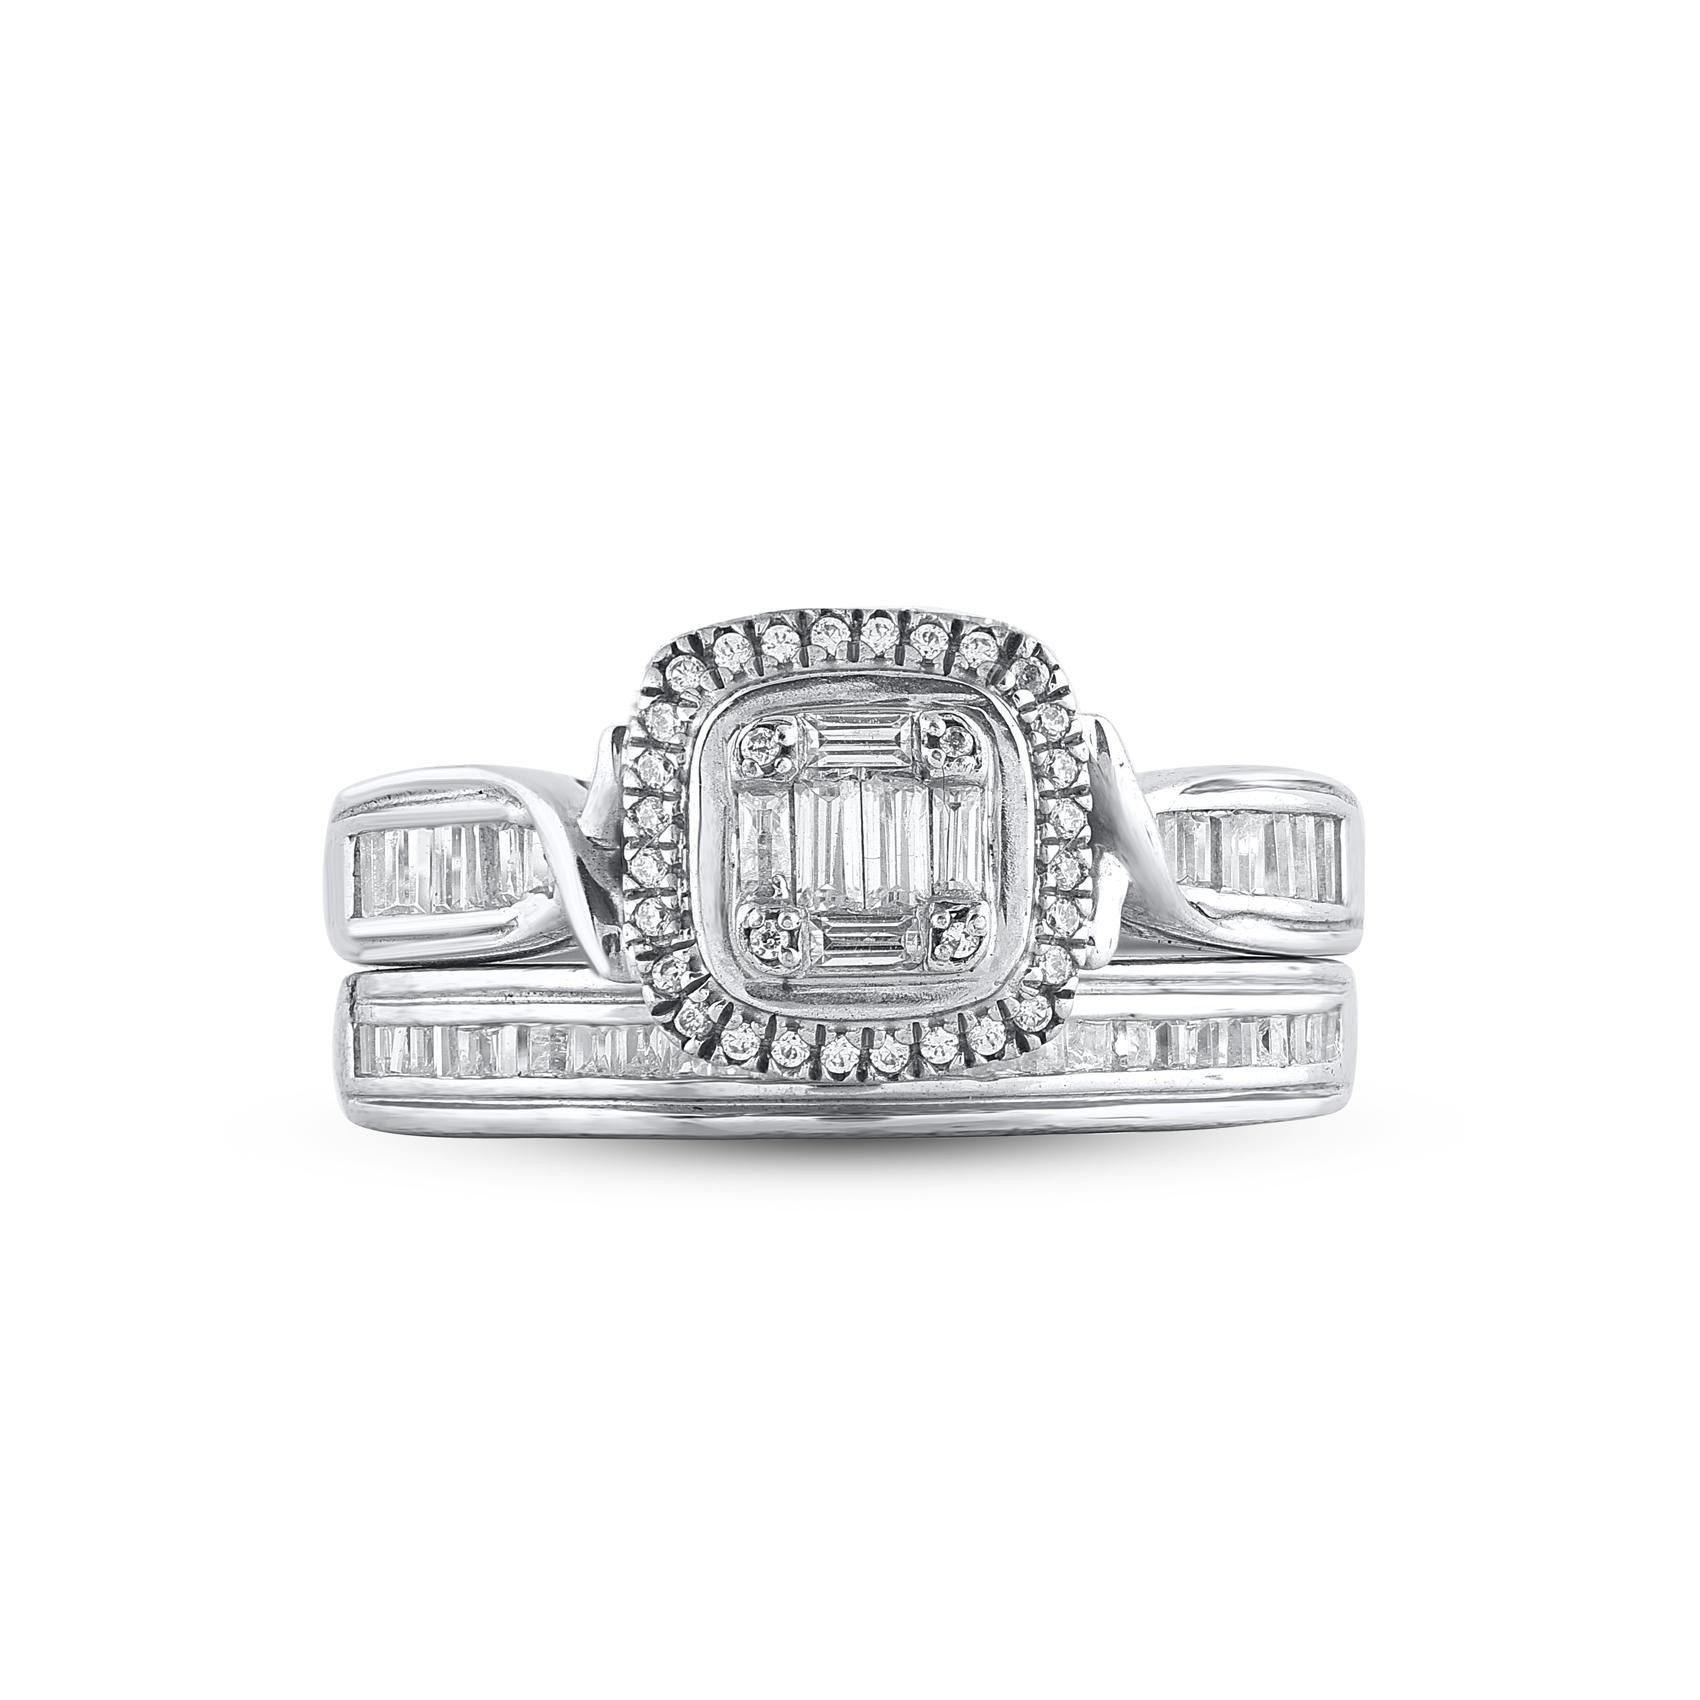 Give her a sophisticated reminder of your love with this diamond ring set. Crafted in 14 Karat white gold. This wedding ring features a sparkling 80 single cut and baguette cut diamonds beautifully set in pave & channel setting. The total diamond